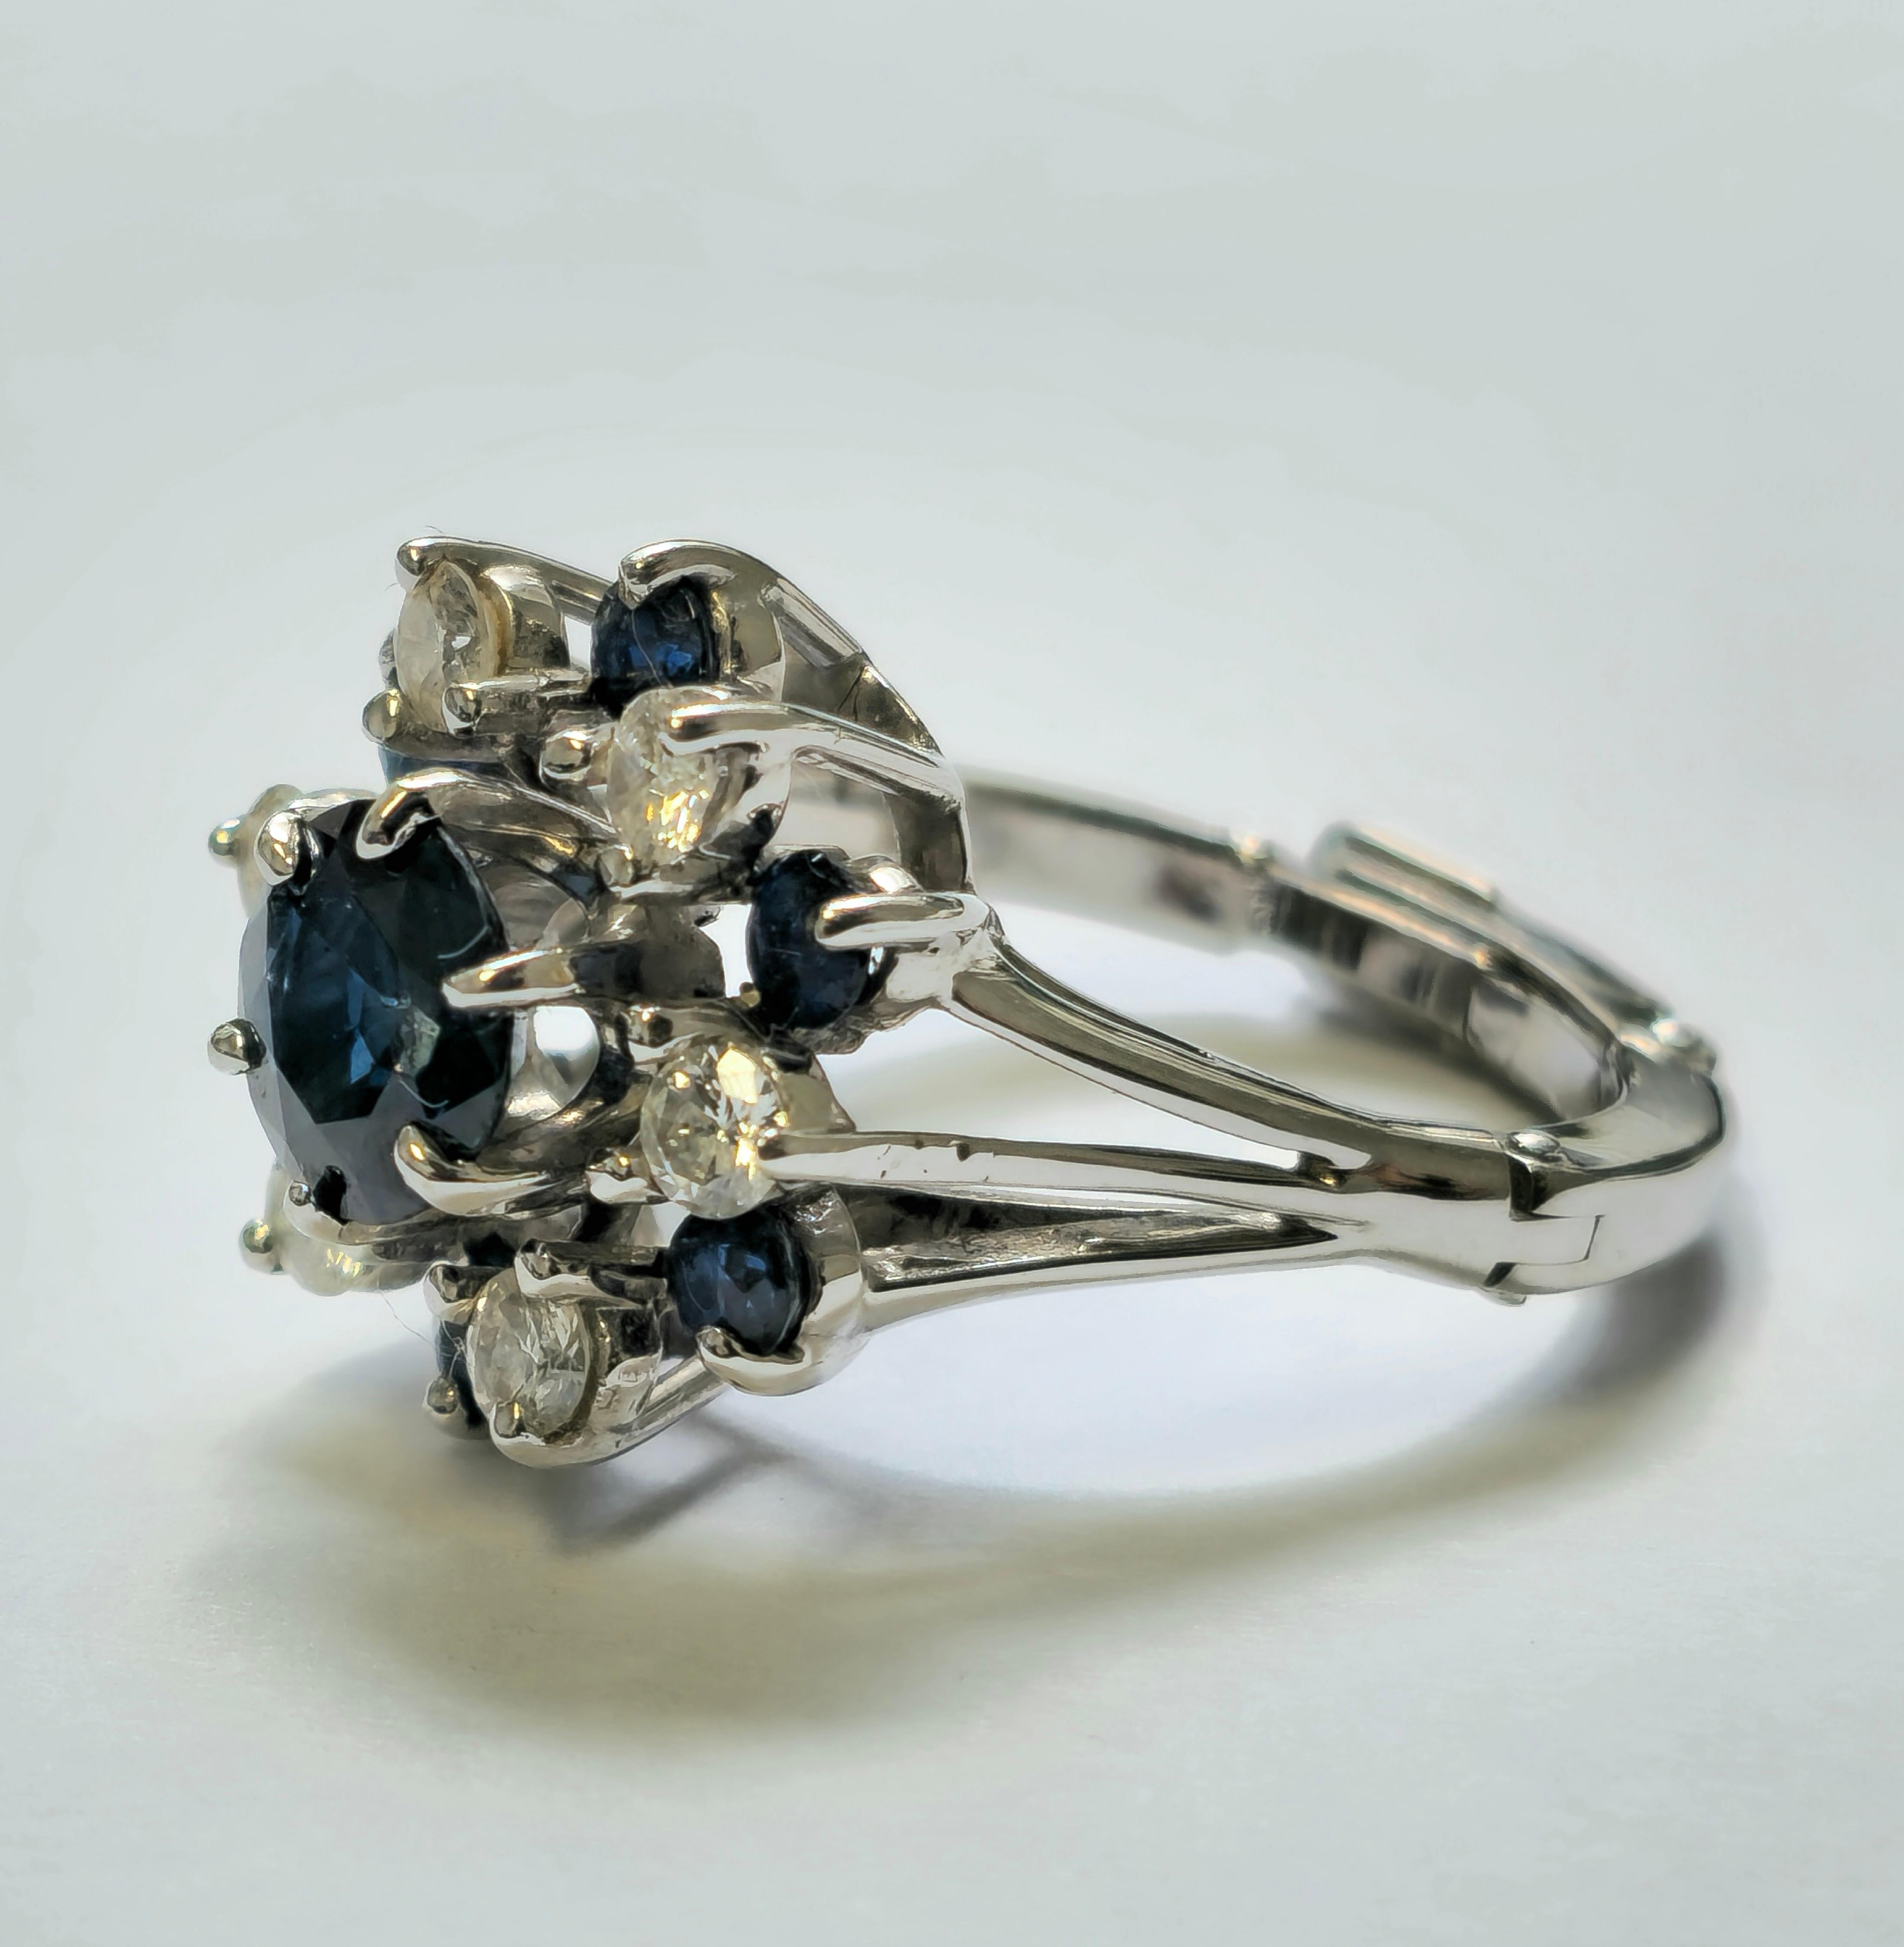 Crafted from luxurious 14k white gold, this exquisite ring features a mesmerizing 2.50 carat round blue sapphire at its center, securely set in a prong setting for maximum brilliance. Flanking the center stone are additional blue sapphires totaling